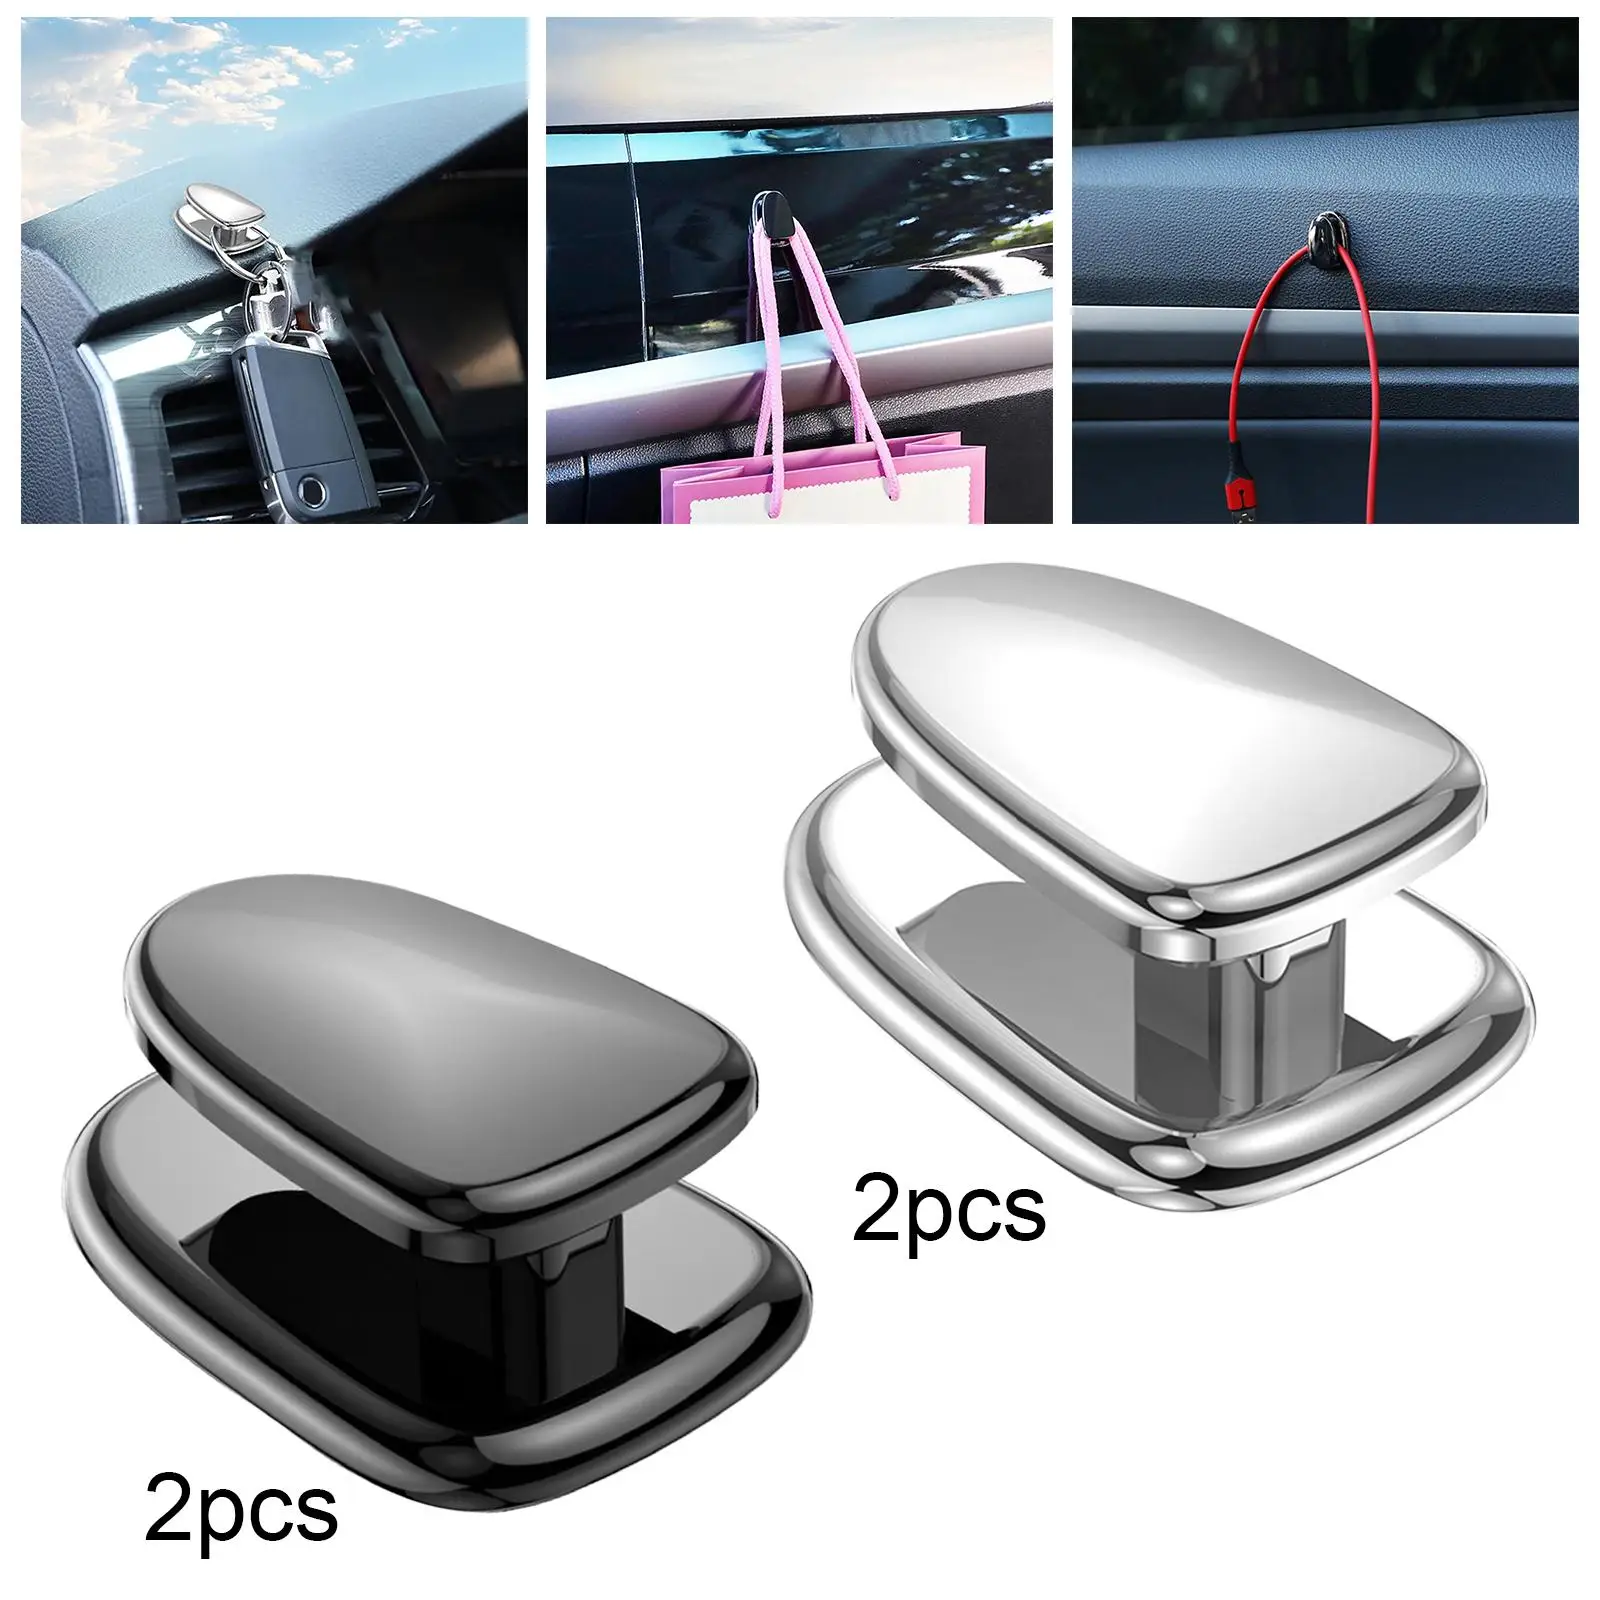 2 Pieces Car Hooks Accs Self Adhesive Storage for Car Sunglass